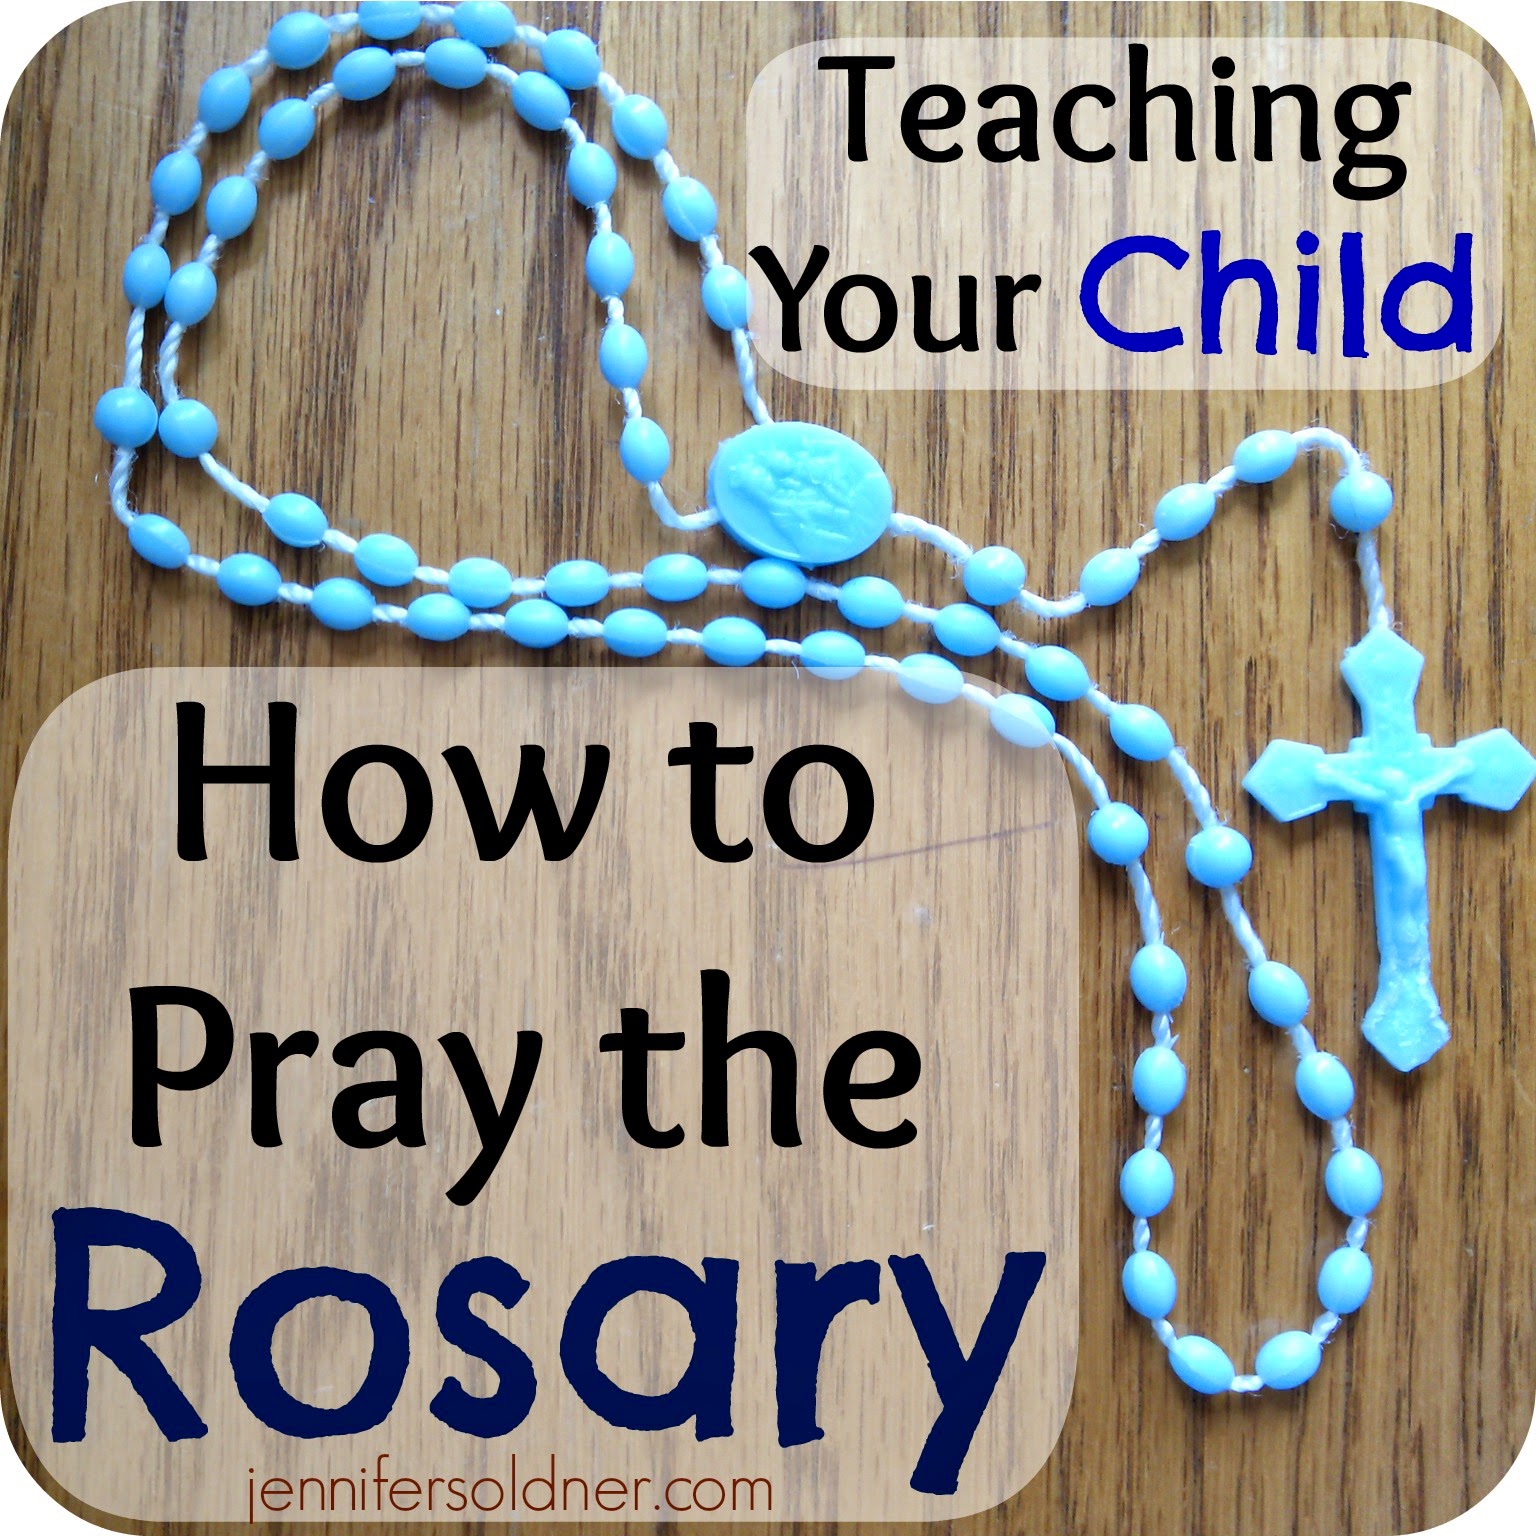 Jennifer Soldner: Tips on Teaching Your Child How to Pray the Rosary